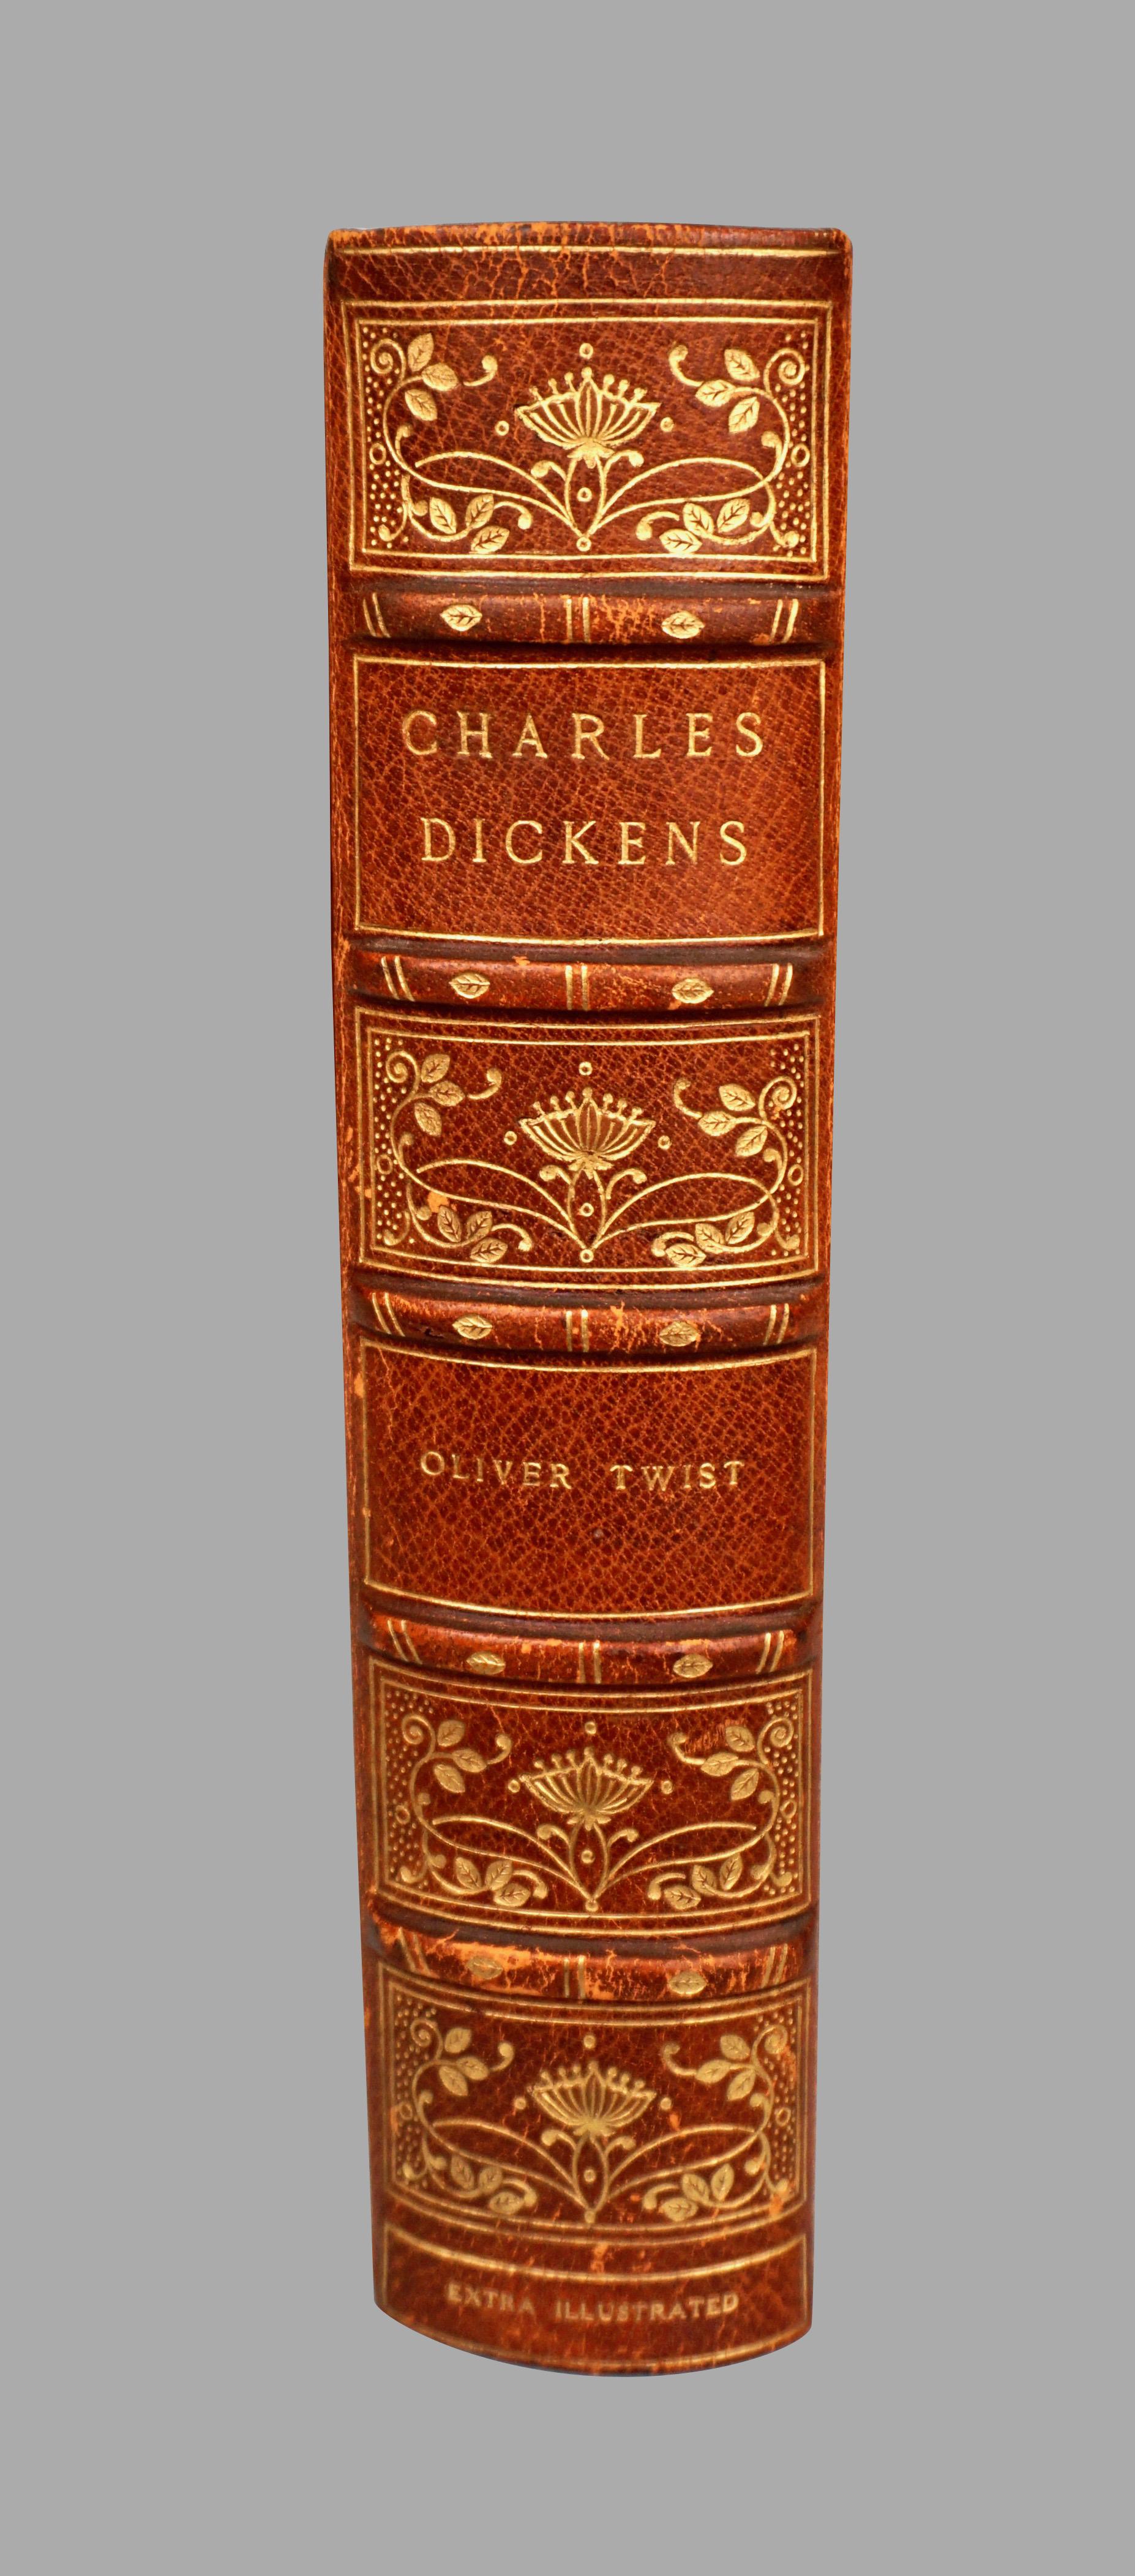 British Complete Works of Dickens Autograph Edition in 30 Gilt-Tooled Leather Volumes